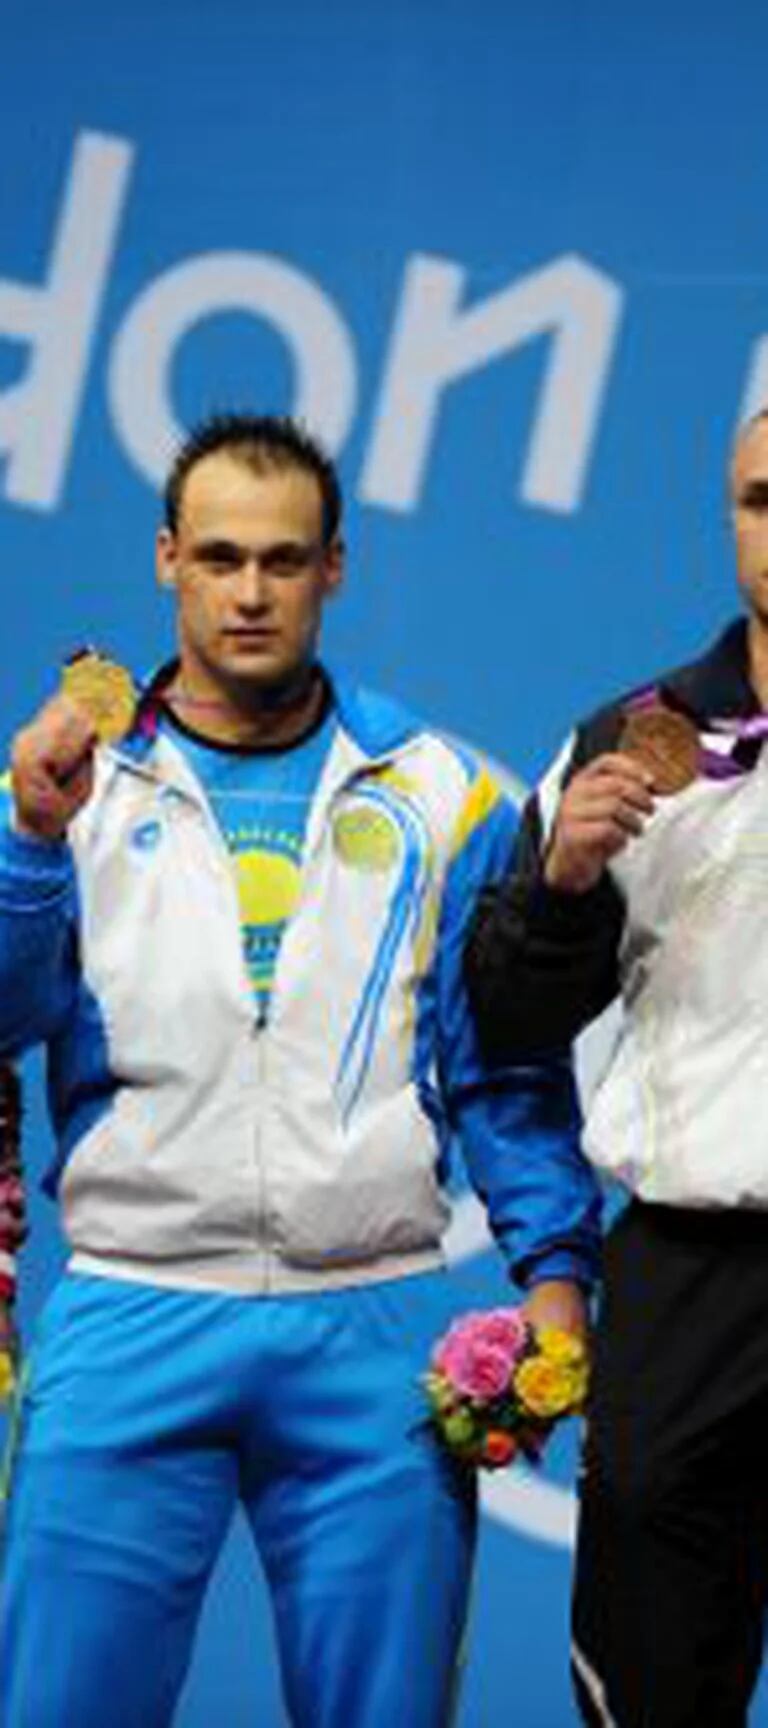 Weightlifter Anatoli Ciricu Tests Positive from London; 9th Place